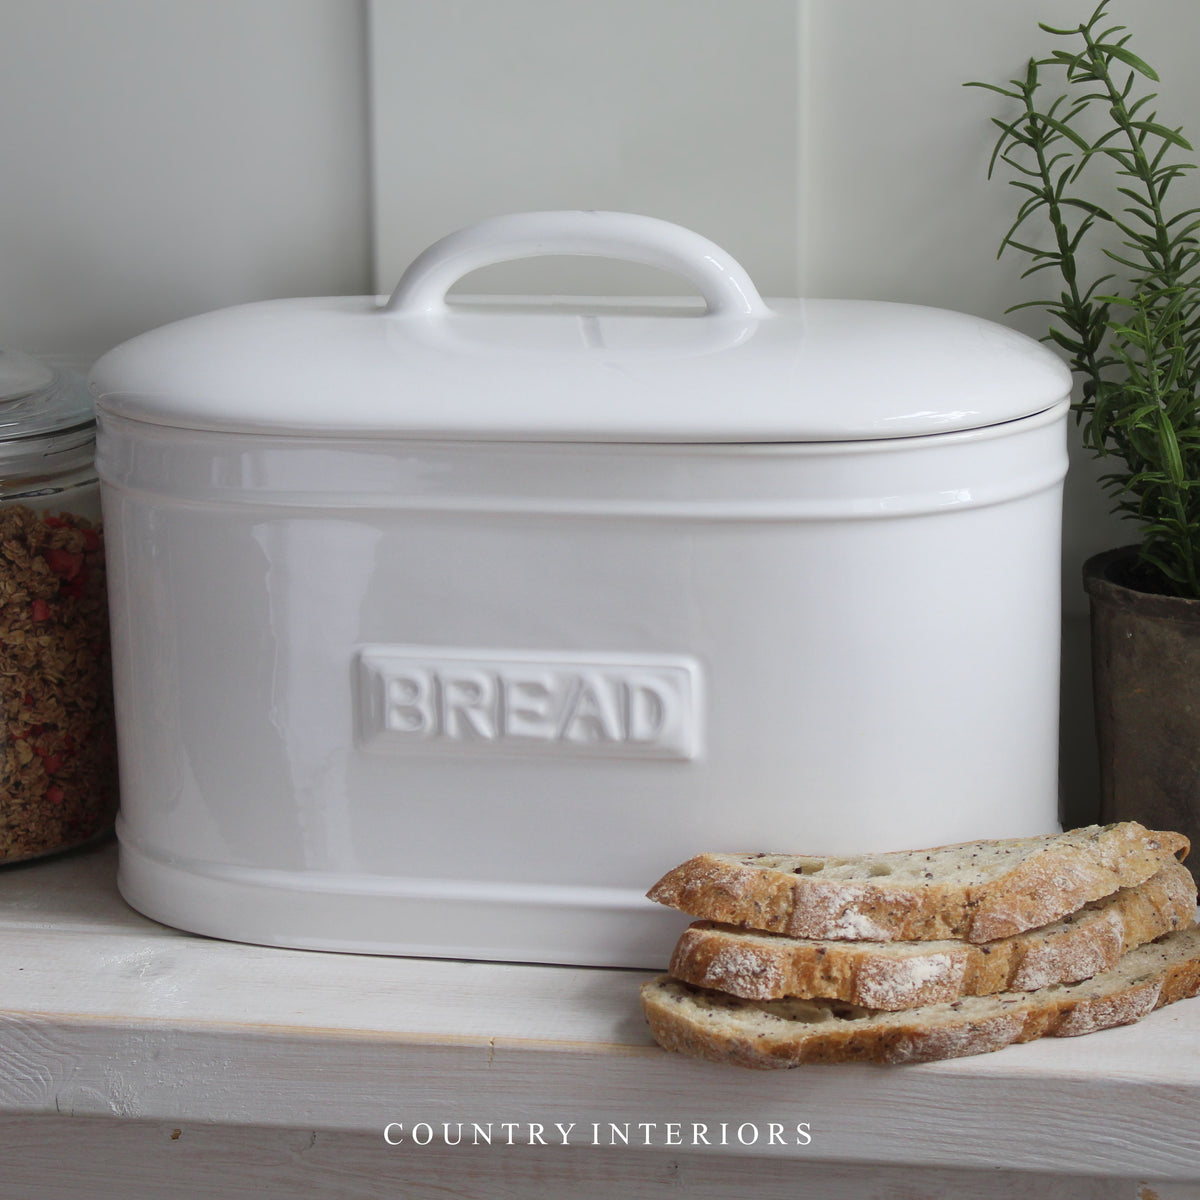 White Ceramic Bread Bin - Due end of May